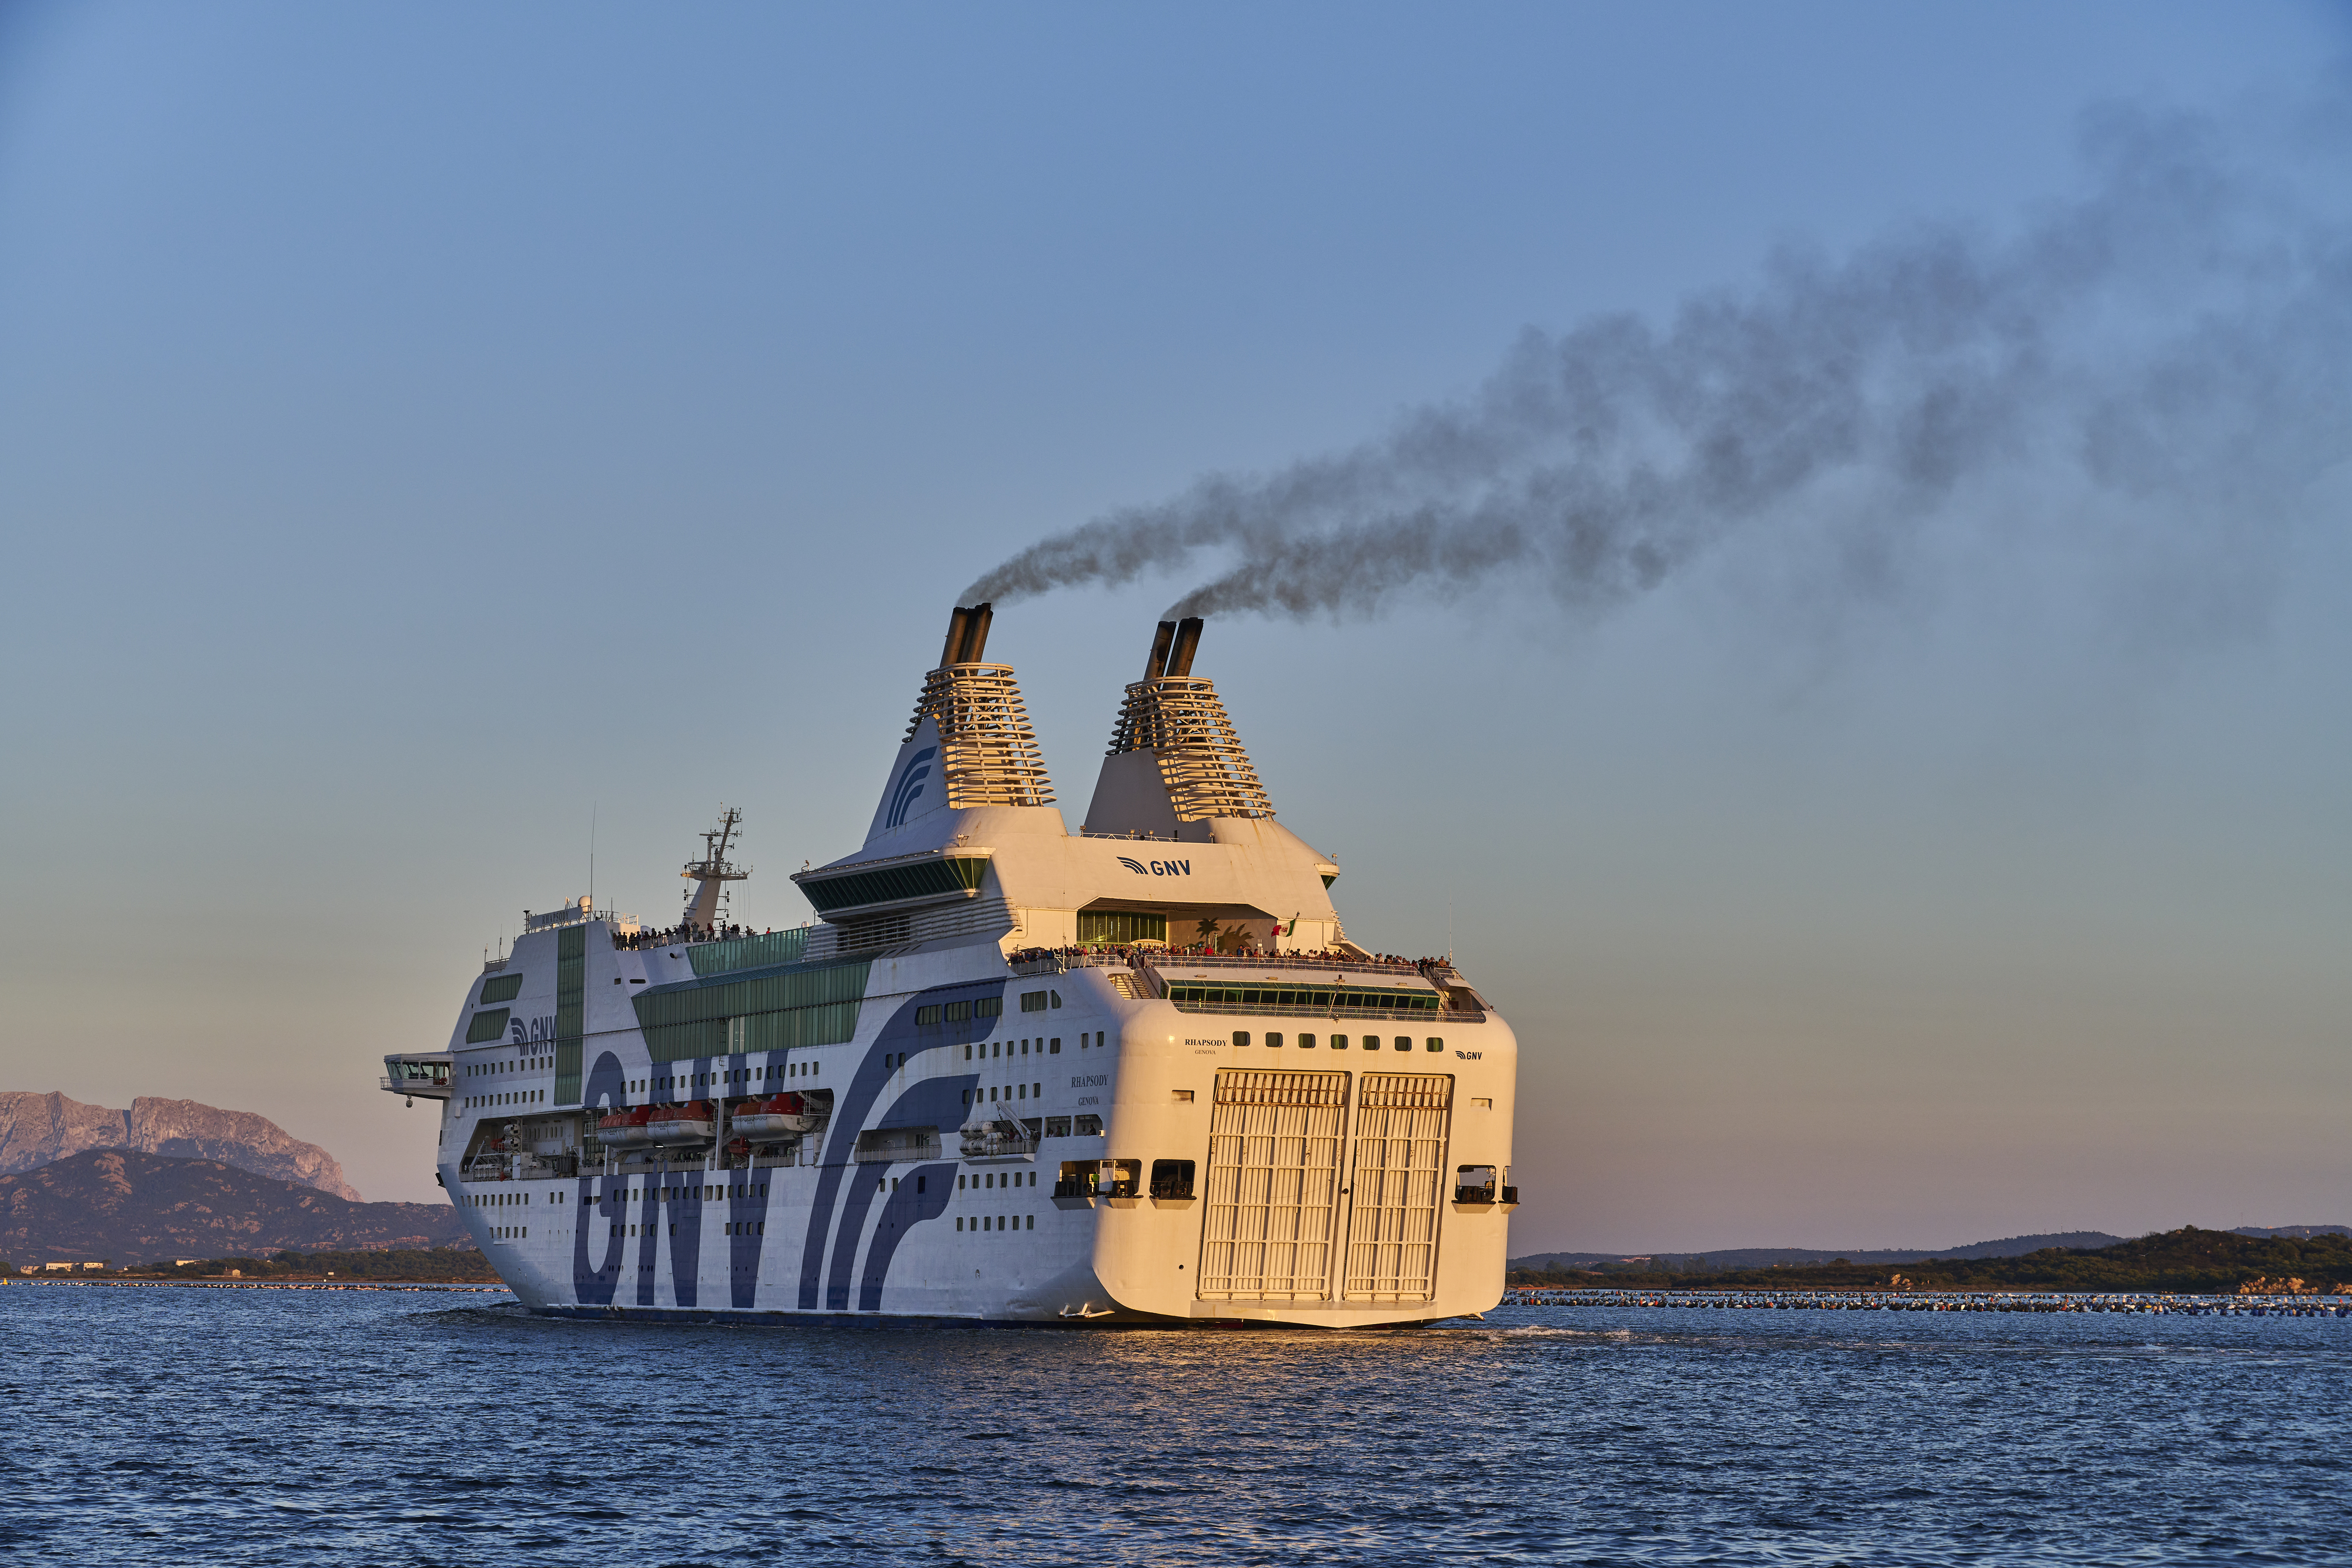 A large cruise ship with the name &quot;GNV&quot; is sailing through calm waters during what appears to be either sunrise or sunset, with mountains visible in the background